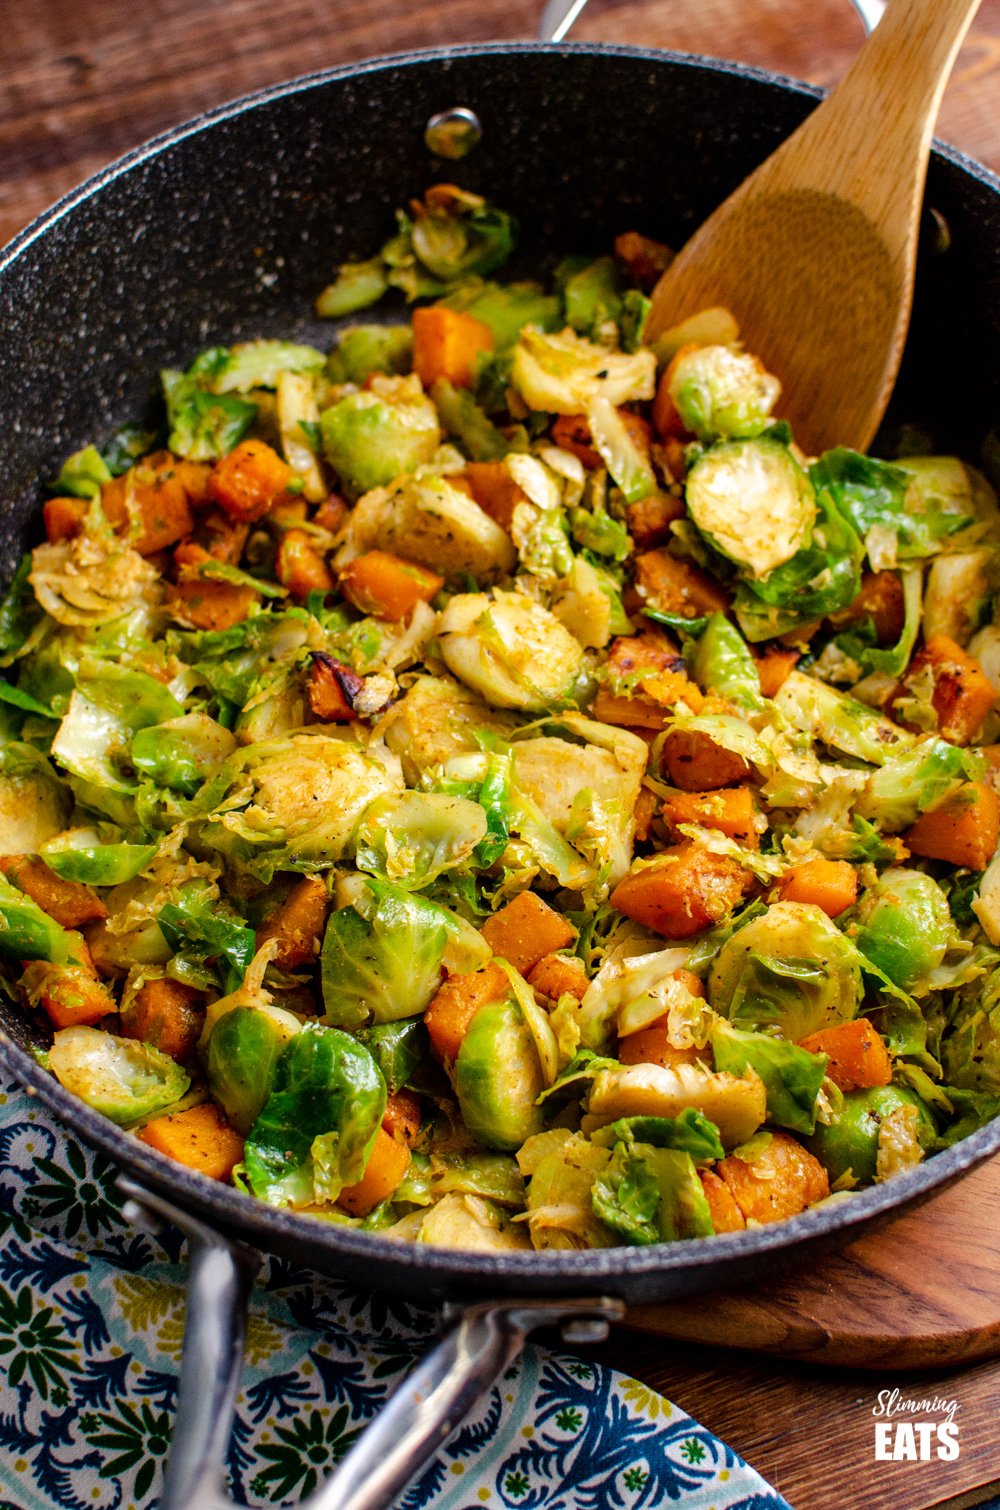 Sautéed Brussel Sprouts with Roasted Butternut Squash in deep frying pan